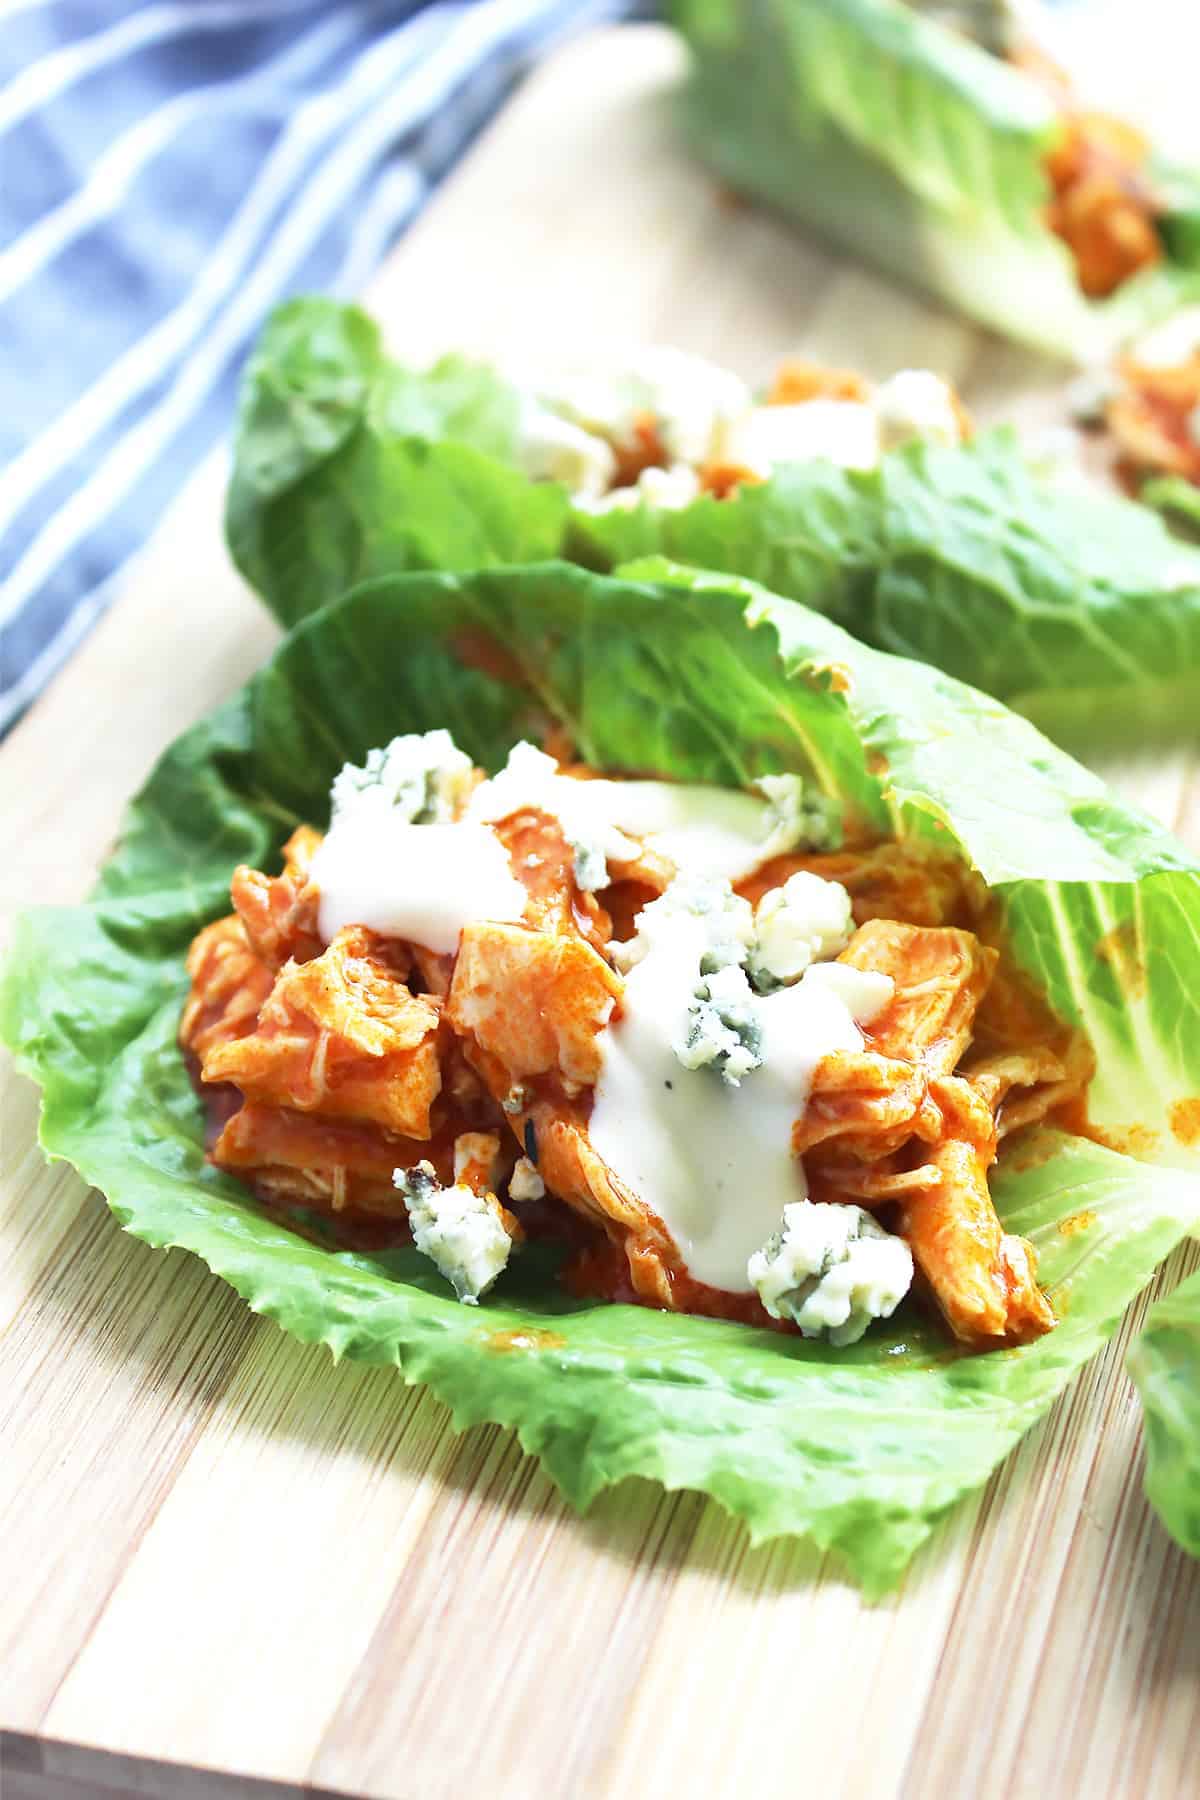 Lettuce wraps topped with chicken, blue cheese and ranch dressing